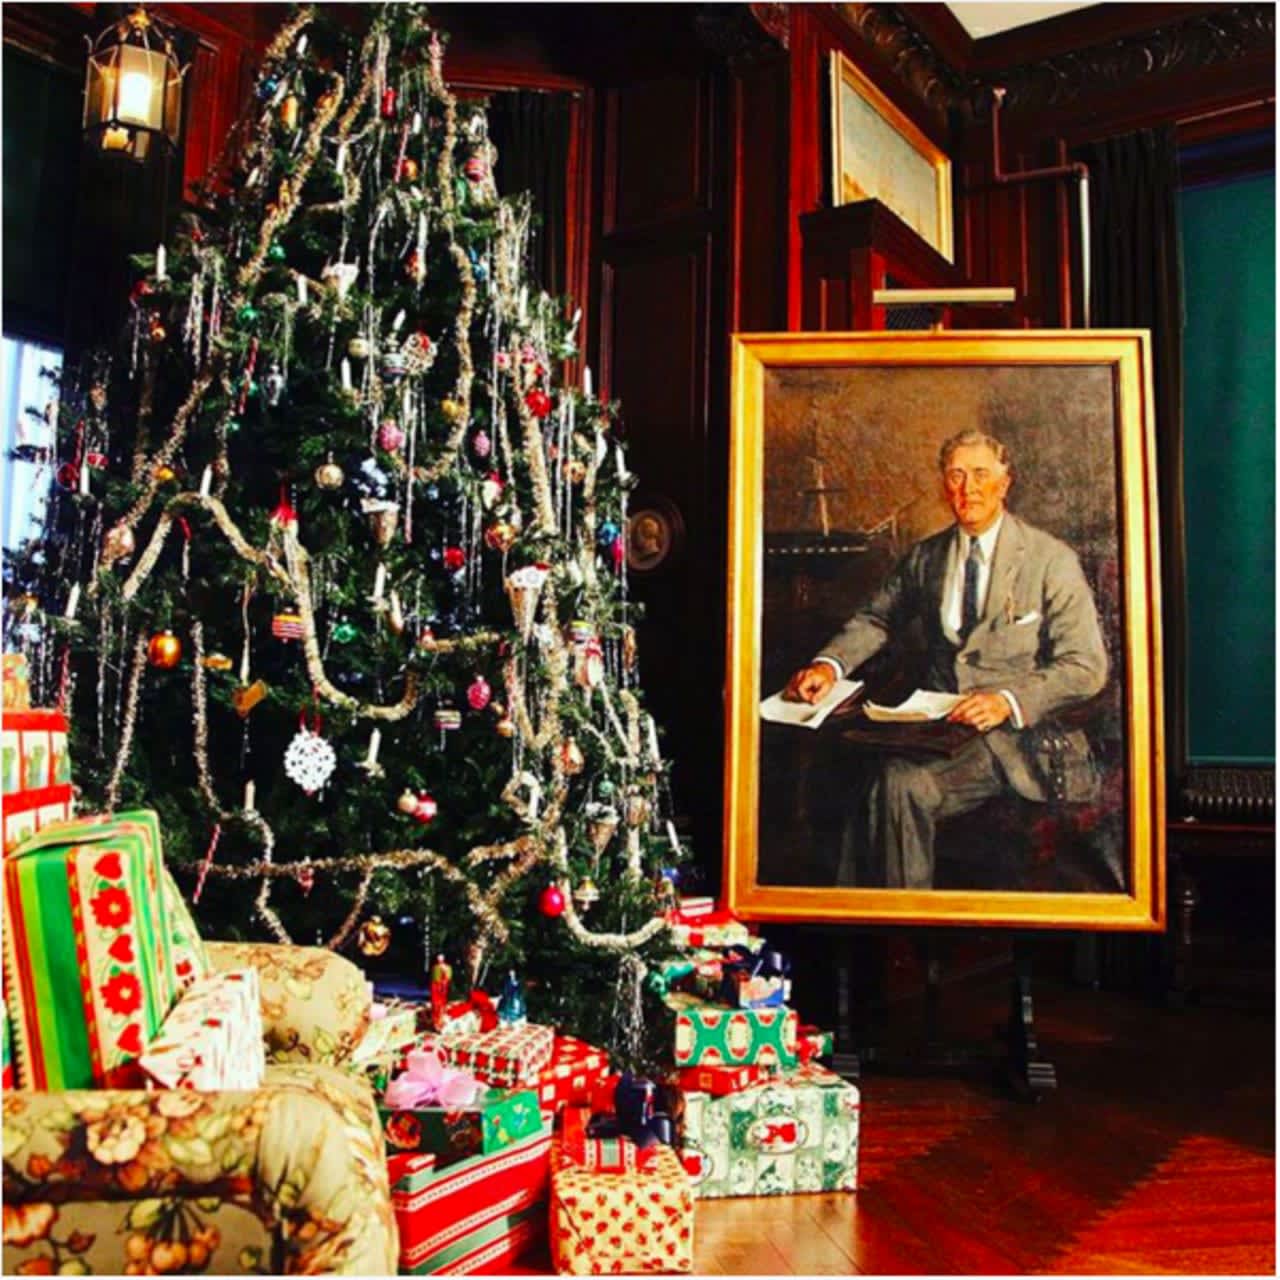 The Home of Franklin D. Roosevelt is being decorated for a Hyde Park Christmas. Visitors can see the decorations after Thanksgiving.